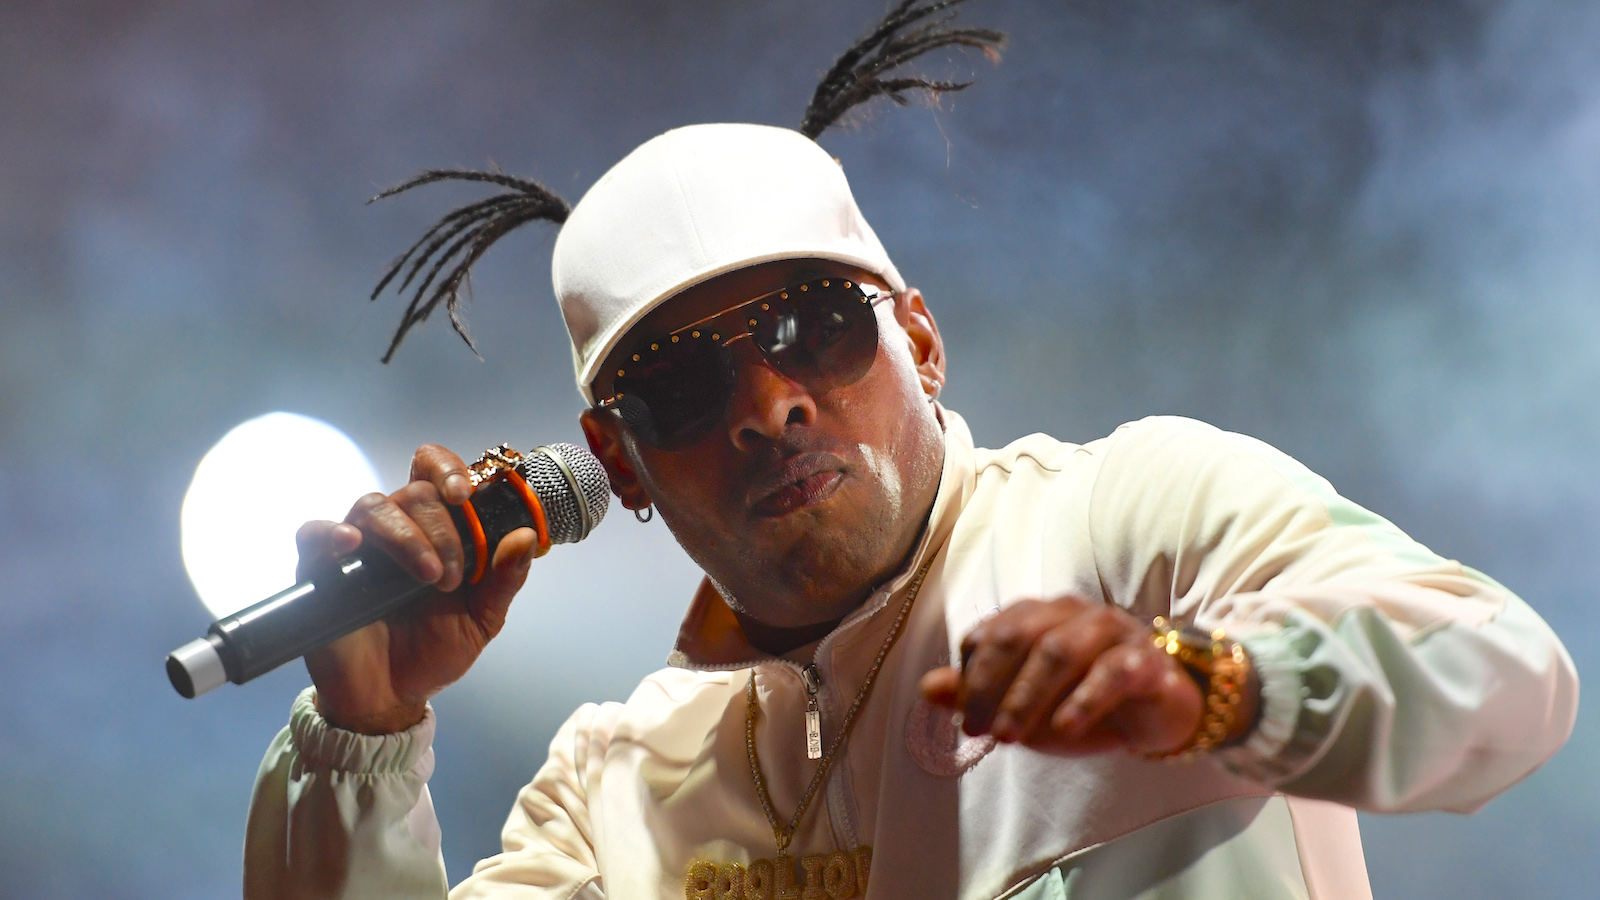 ‘Gangster’s Paradise’ rapper Coolio is dead, aged 59